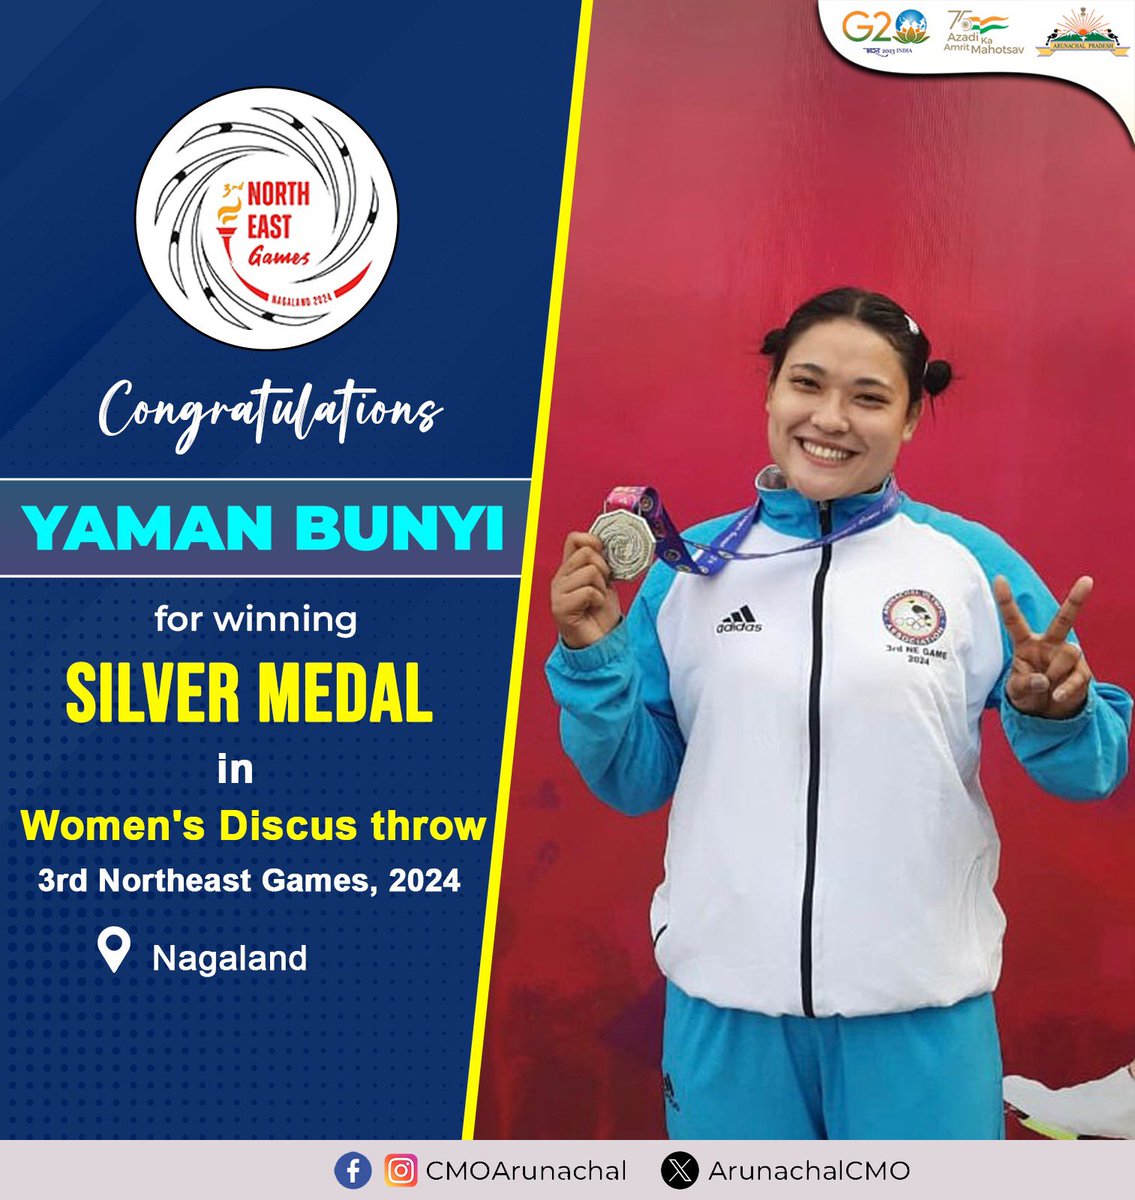 Congratulations to Yaman Bunyi for winning the Silver Medal in Women's Discus Throw at the Northeast Games! 🥈 With an impressive throw of 27.51 mtrs, Your remarkable achievement sets a shining example for all. Keep shining and continue to inspire! #NortheastGames #DiscusThrow